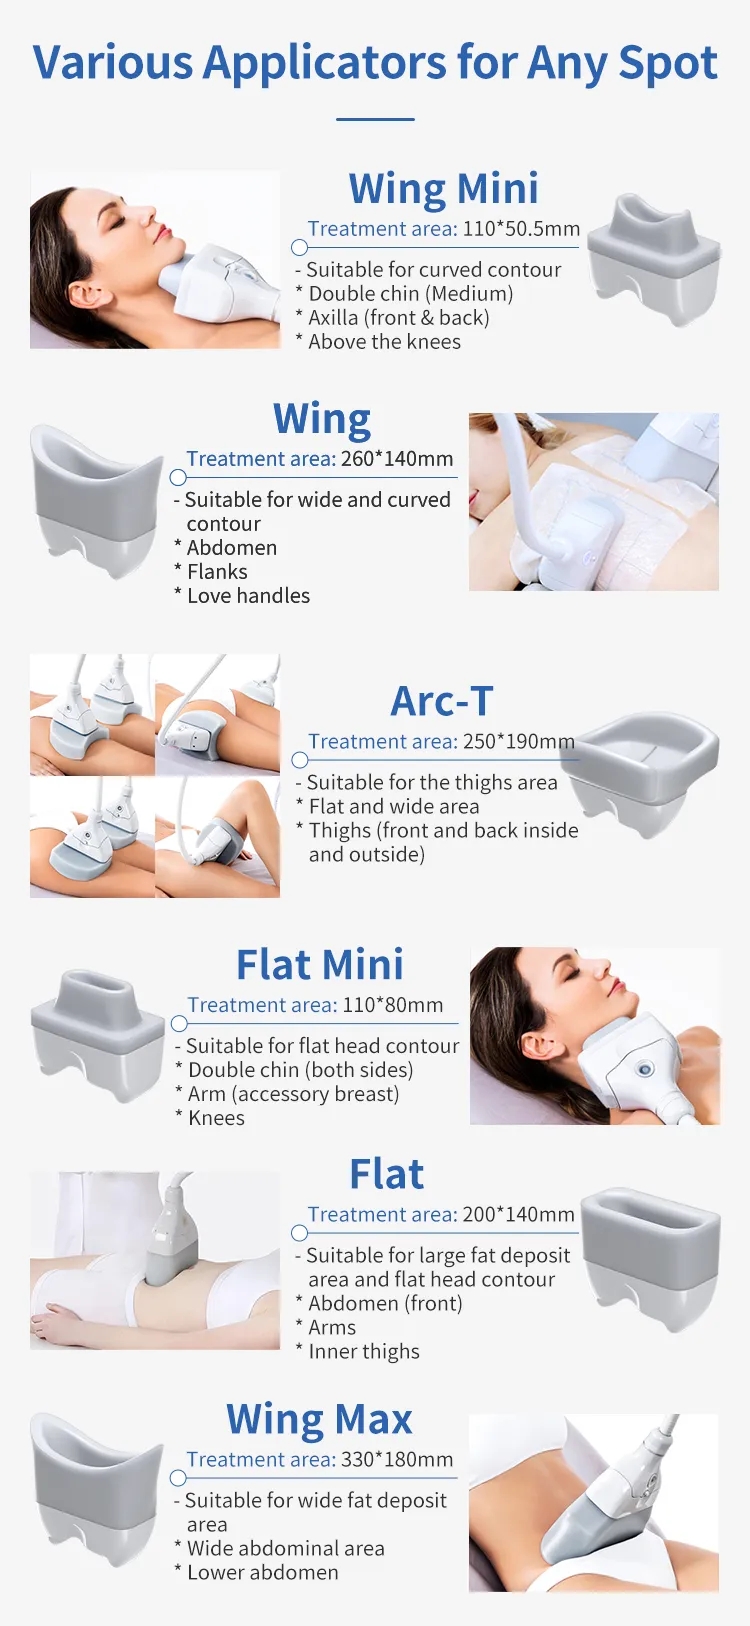 Non-invasive Cryotherapy Slimming Machine 6 Handle 360 Full Cover Ice Cold Fat Freezing Weight Loss Beauty Device Obvious Effect 6 Handles Cryotherapy Fat Freezing Machine cryolipolysis machine,cryolipolysis fat freezing machine,cryolipolysis slimming machine